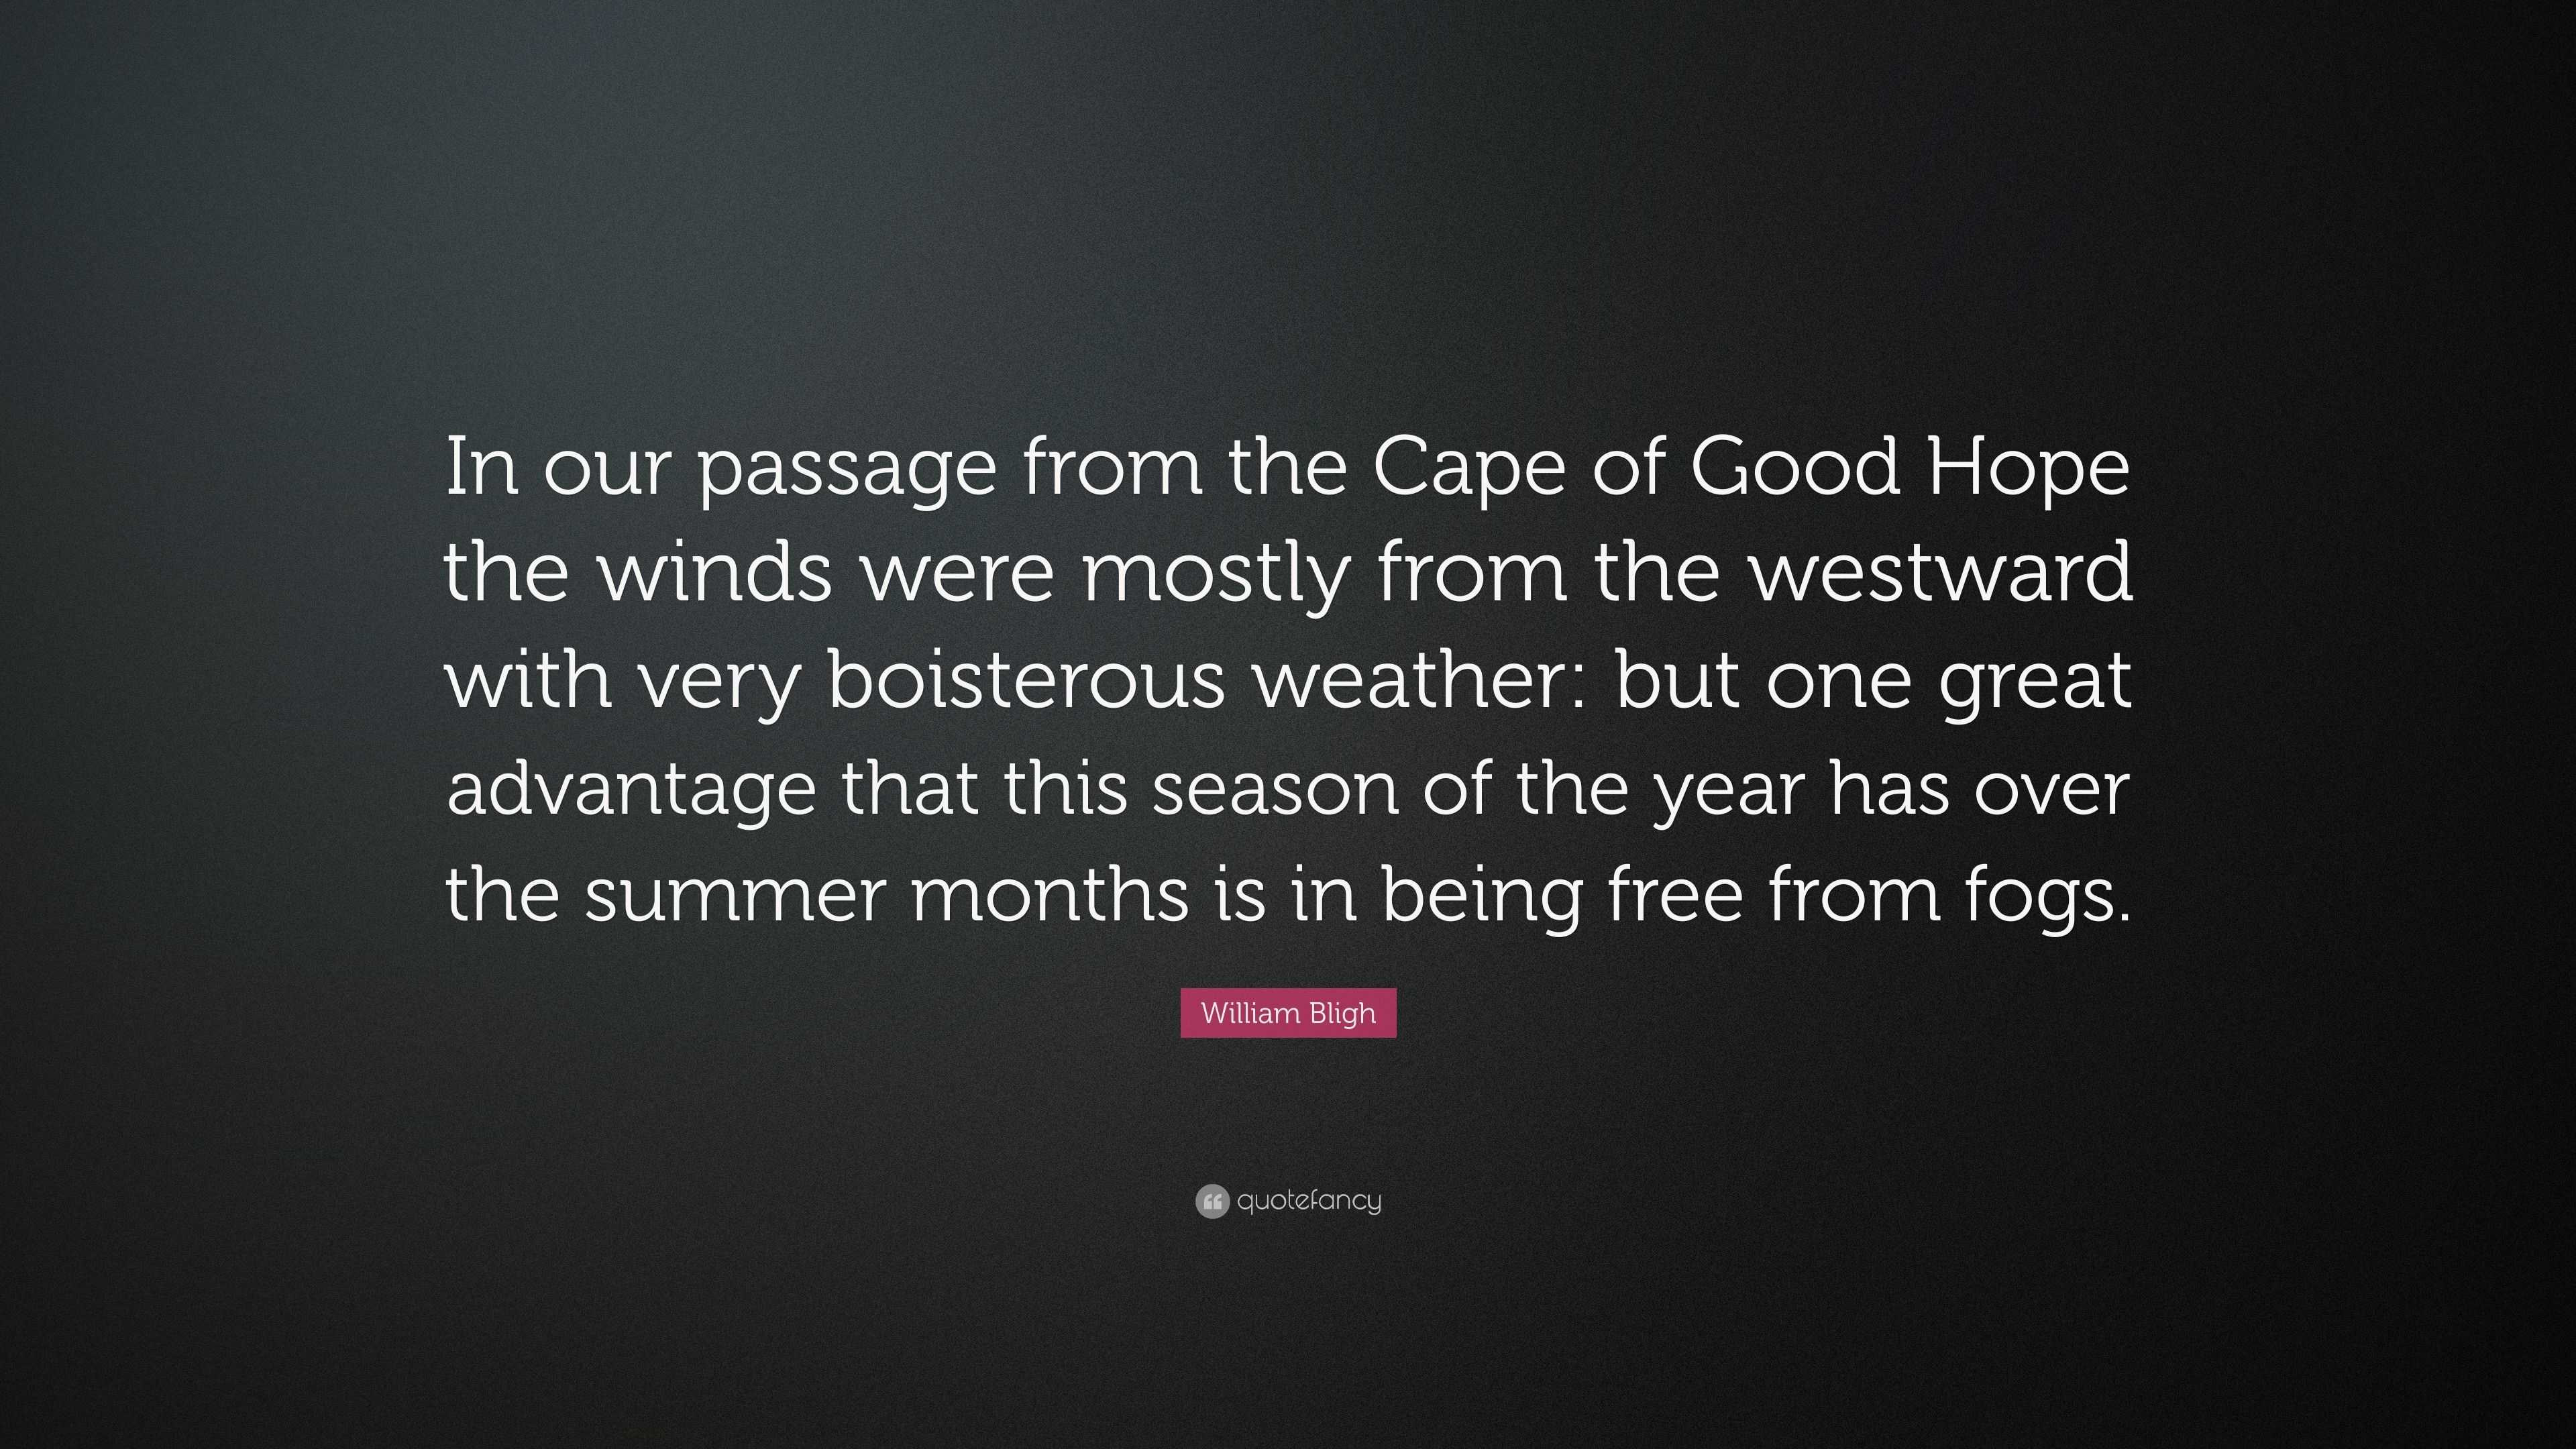 Passage hope bligh william cape good mostly winds were quote westward boisterous weather very but quotefancy quotes fogs advantage months